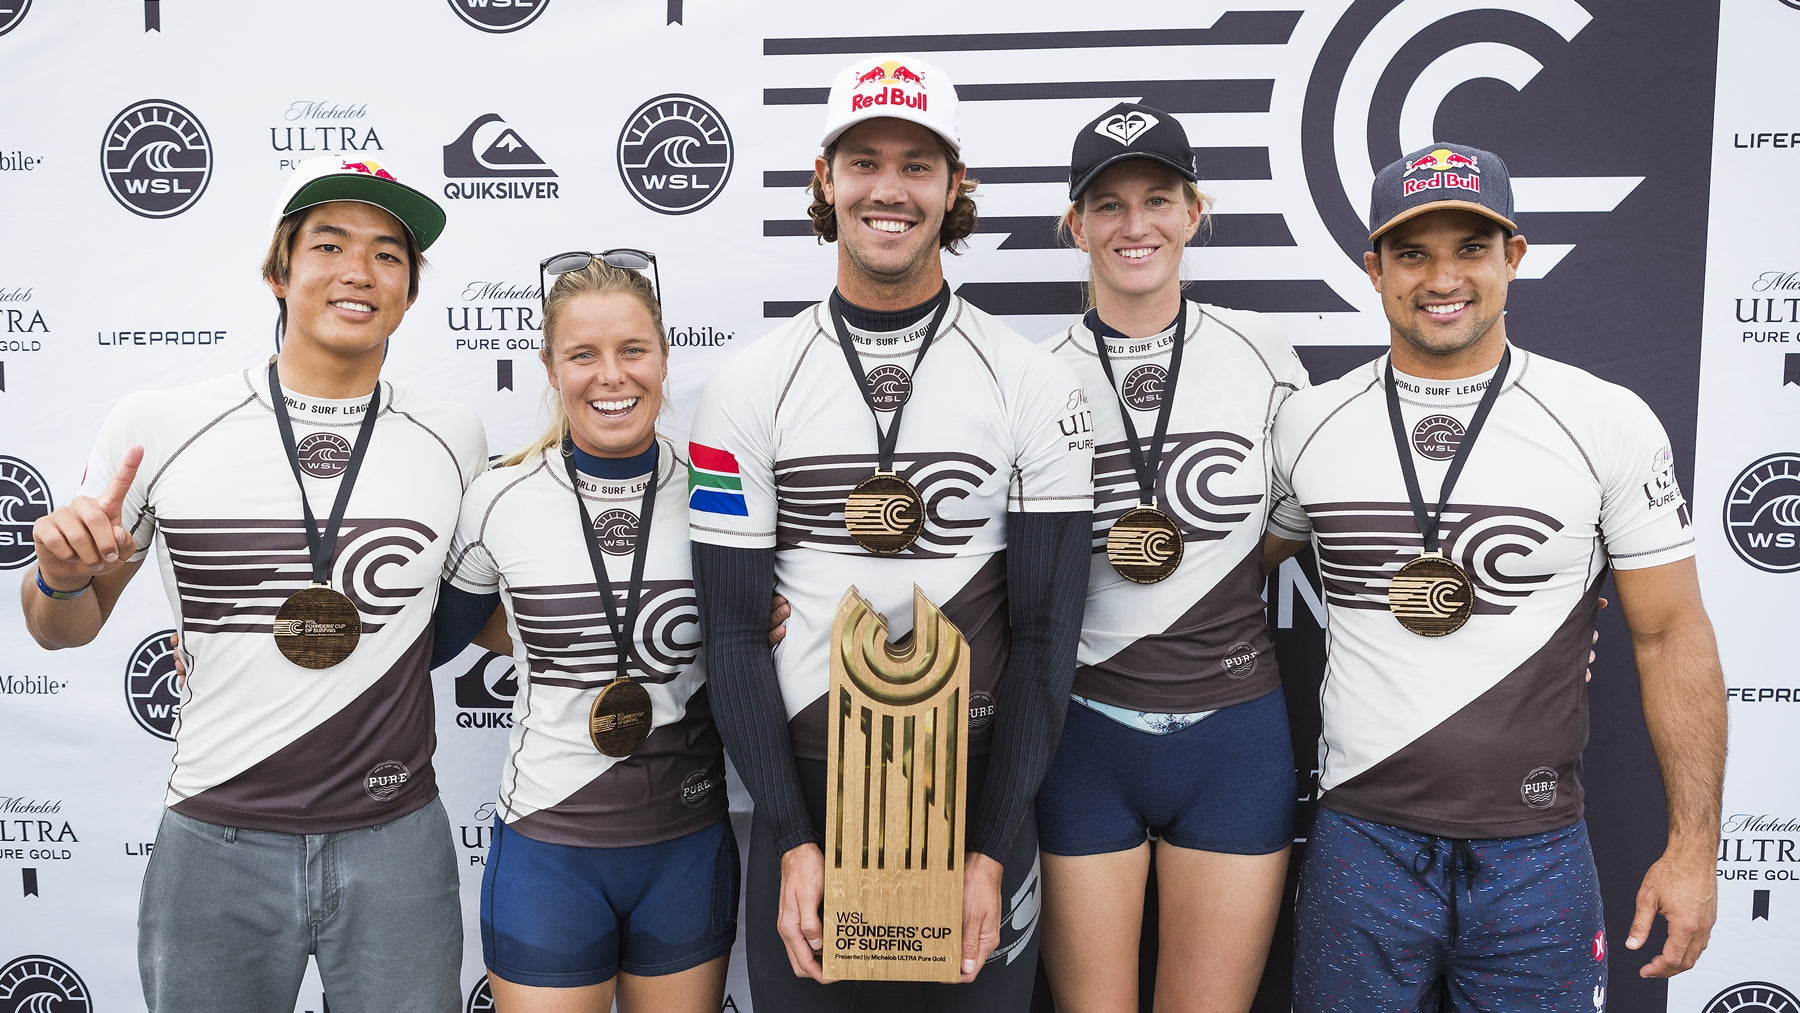 Team World at the Inaugural WSL Founders' Cup. L-R Kanoa Igarashi, Paige Hareb, Jordy Smith, Bianca Buitentag, Michel Bourez